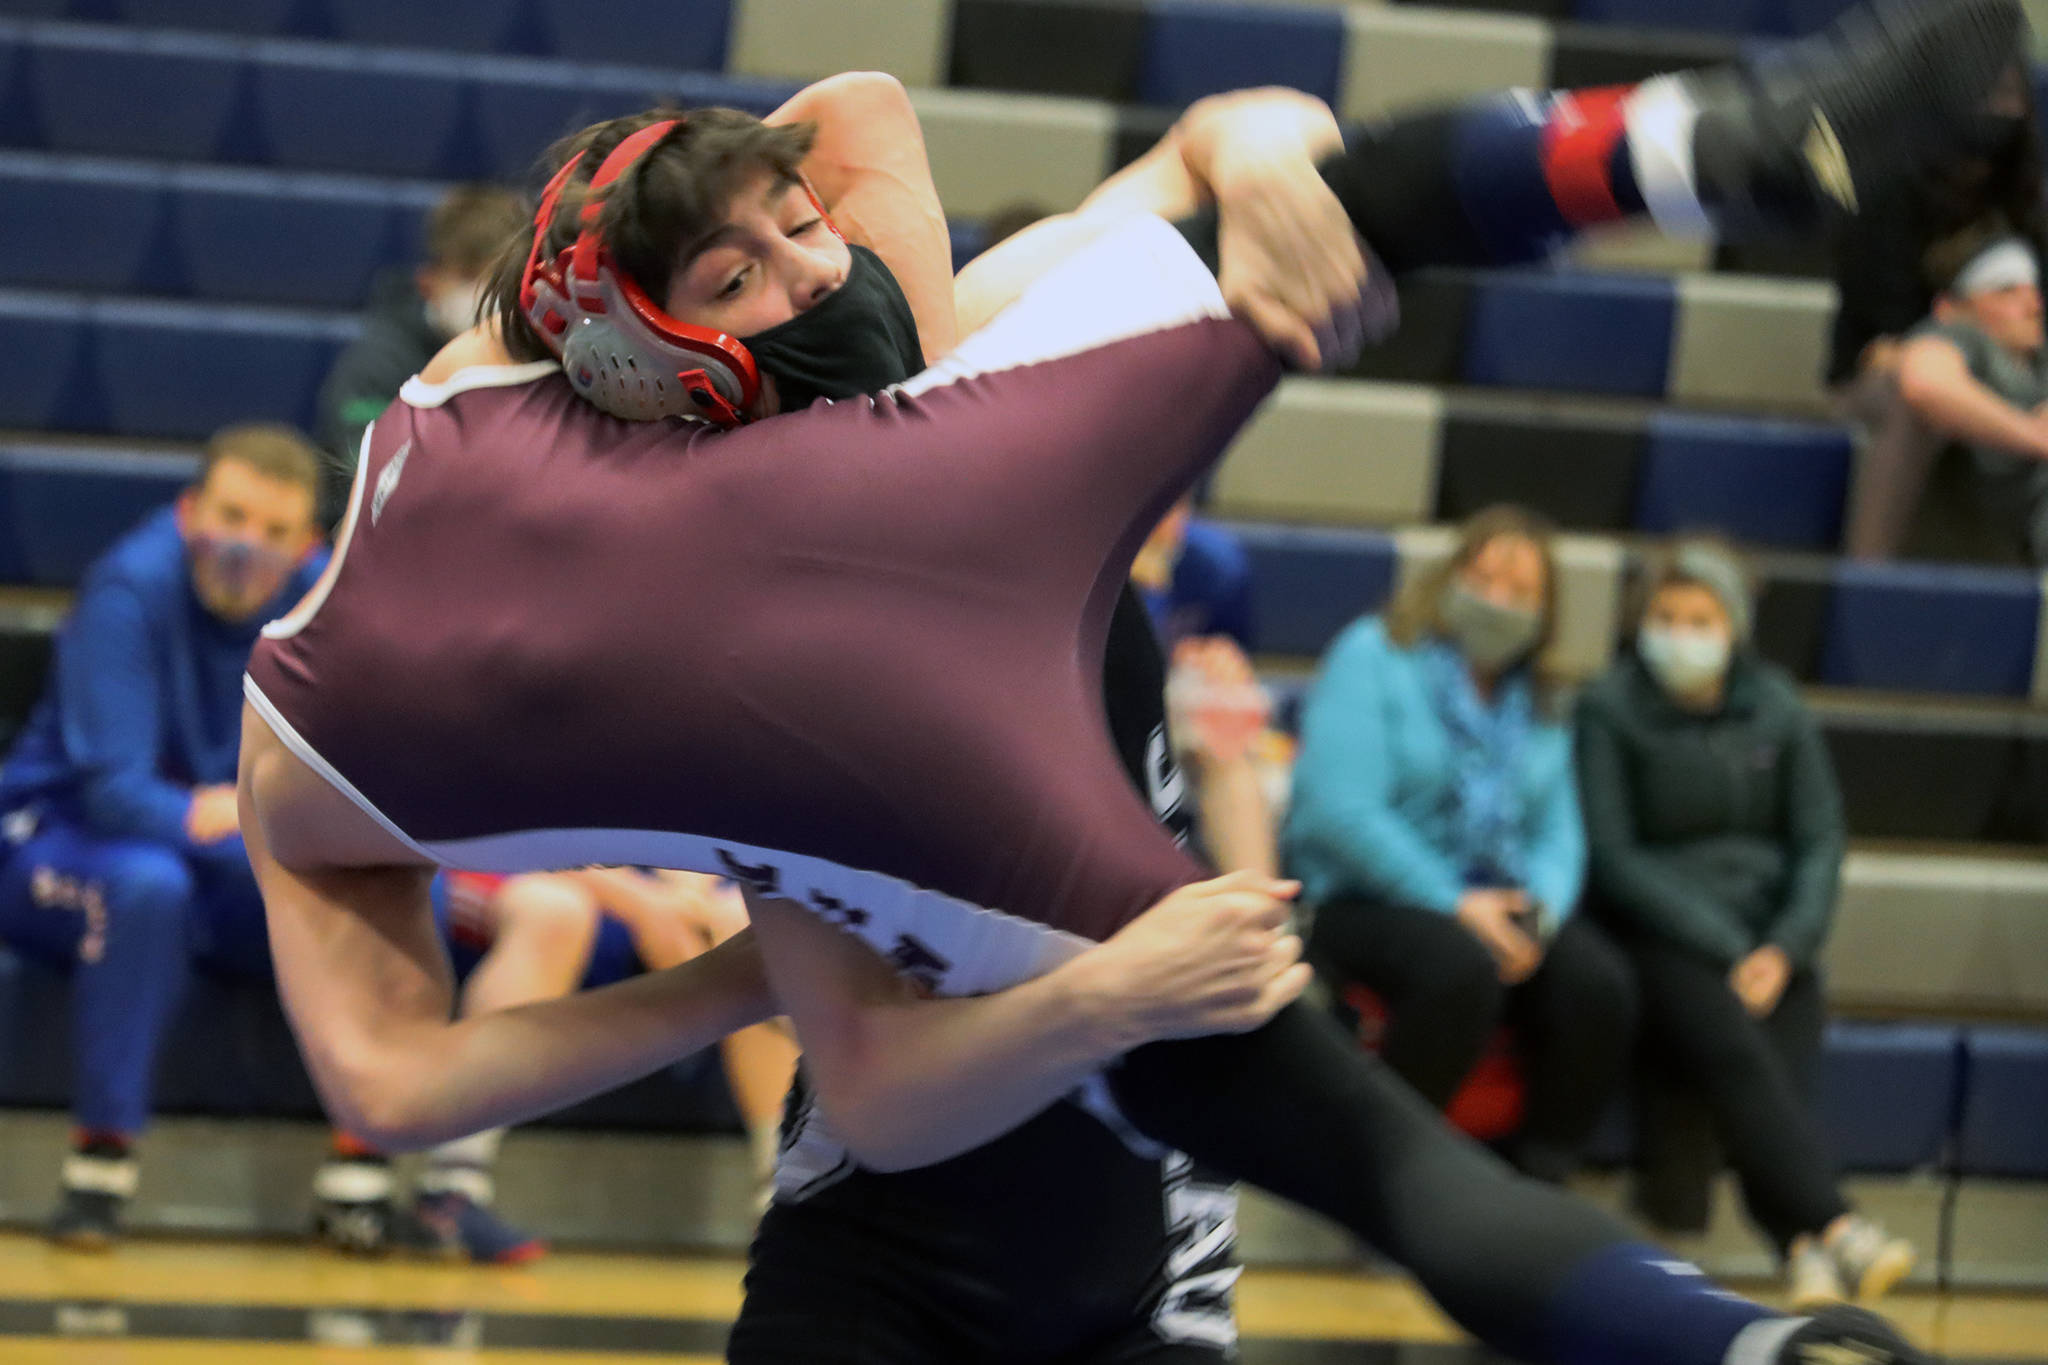 Carson Cummins hoists his opponent from Ketchikan High School before taking him to the mat during a tournament at Thunder Mountain High School on Friday, April 3. (Ben Hohenstatt / Juneau Empire).